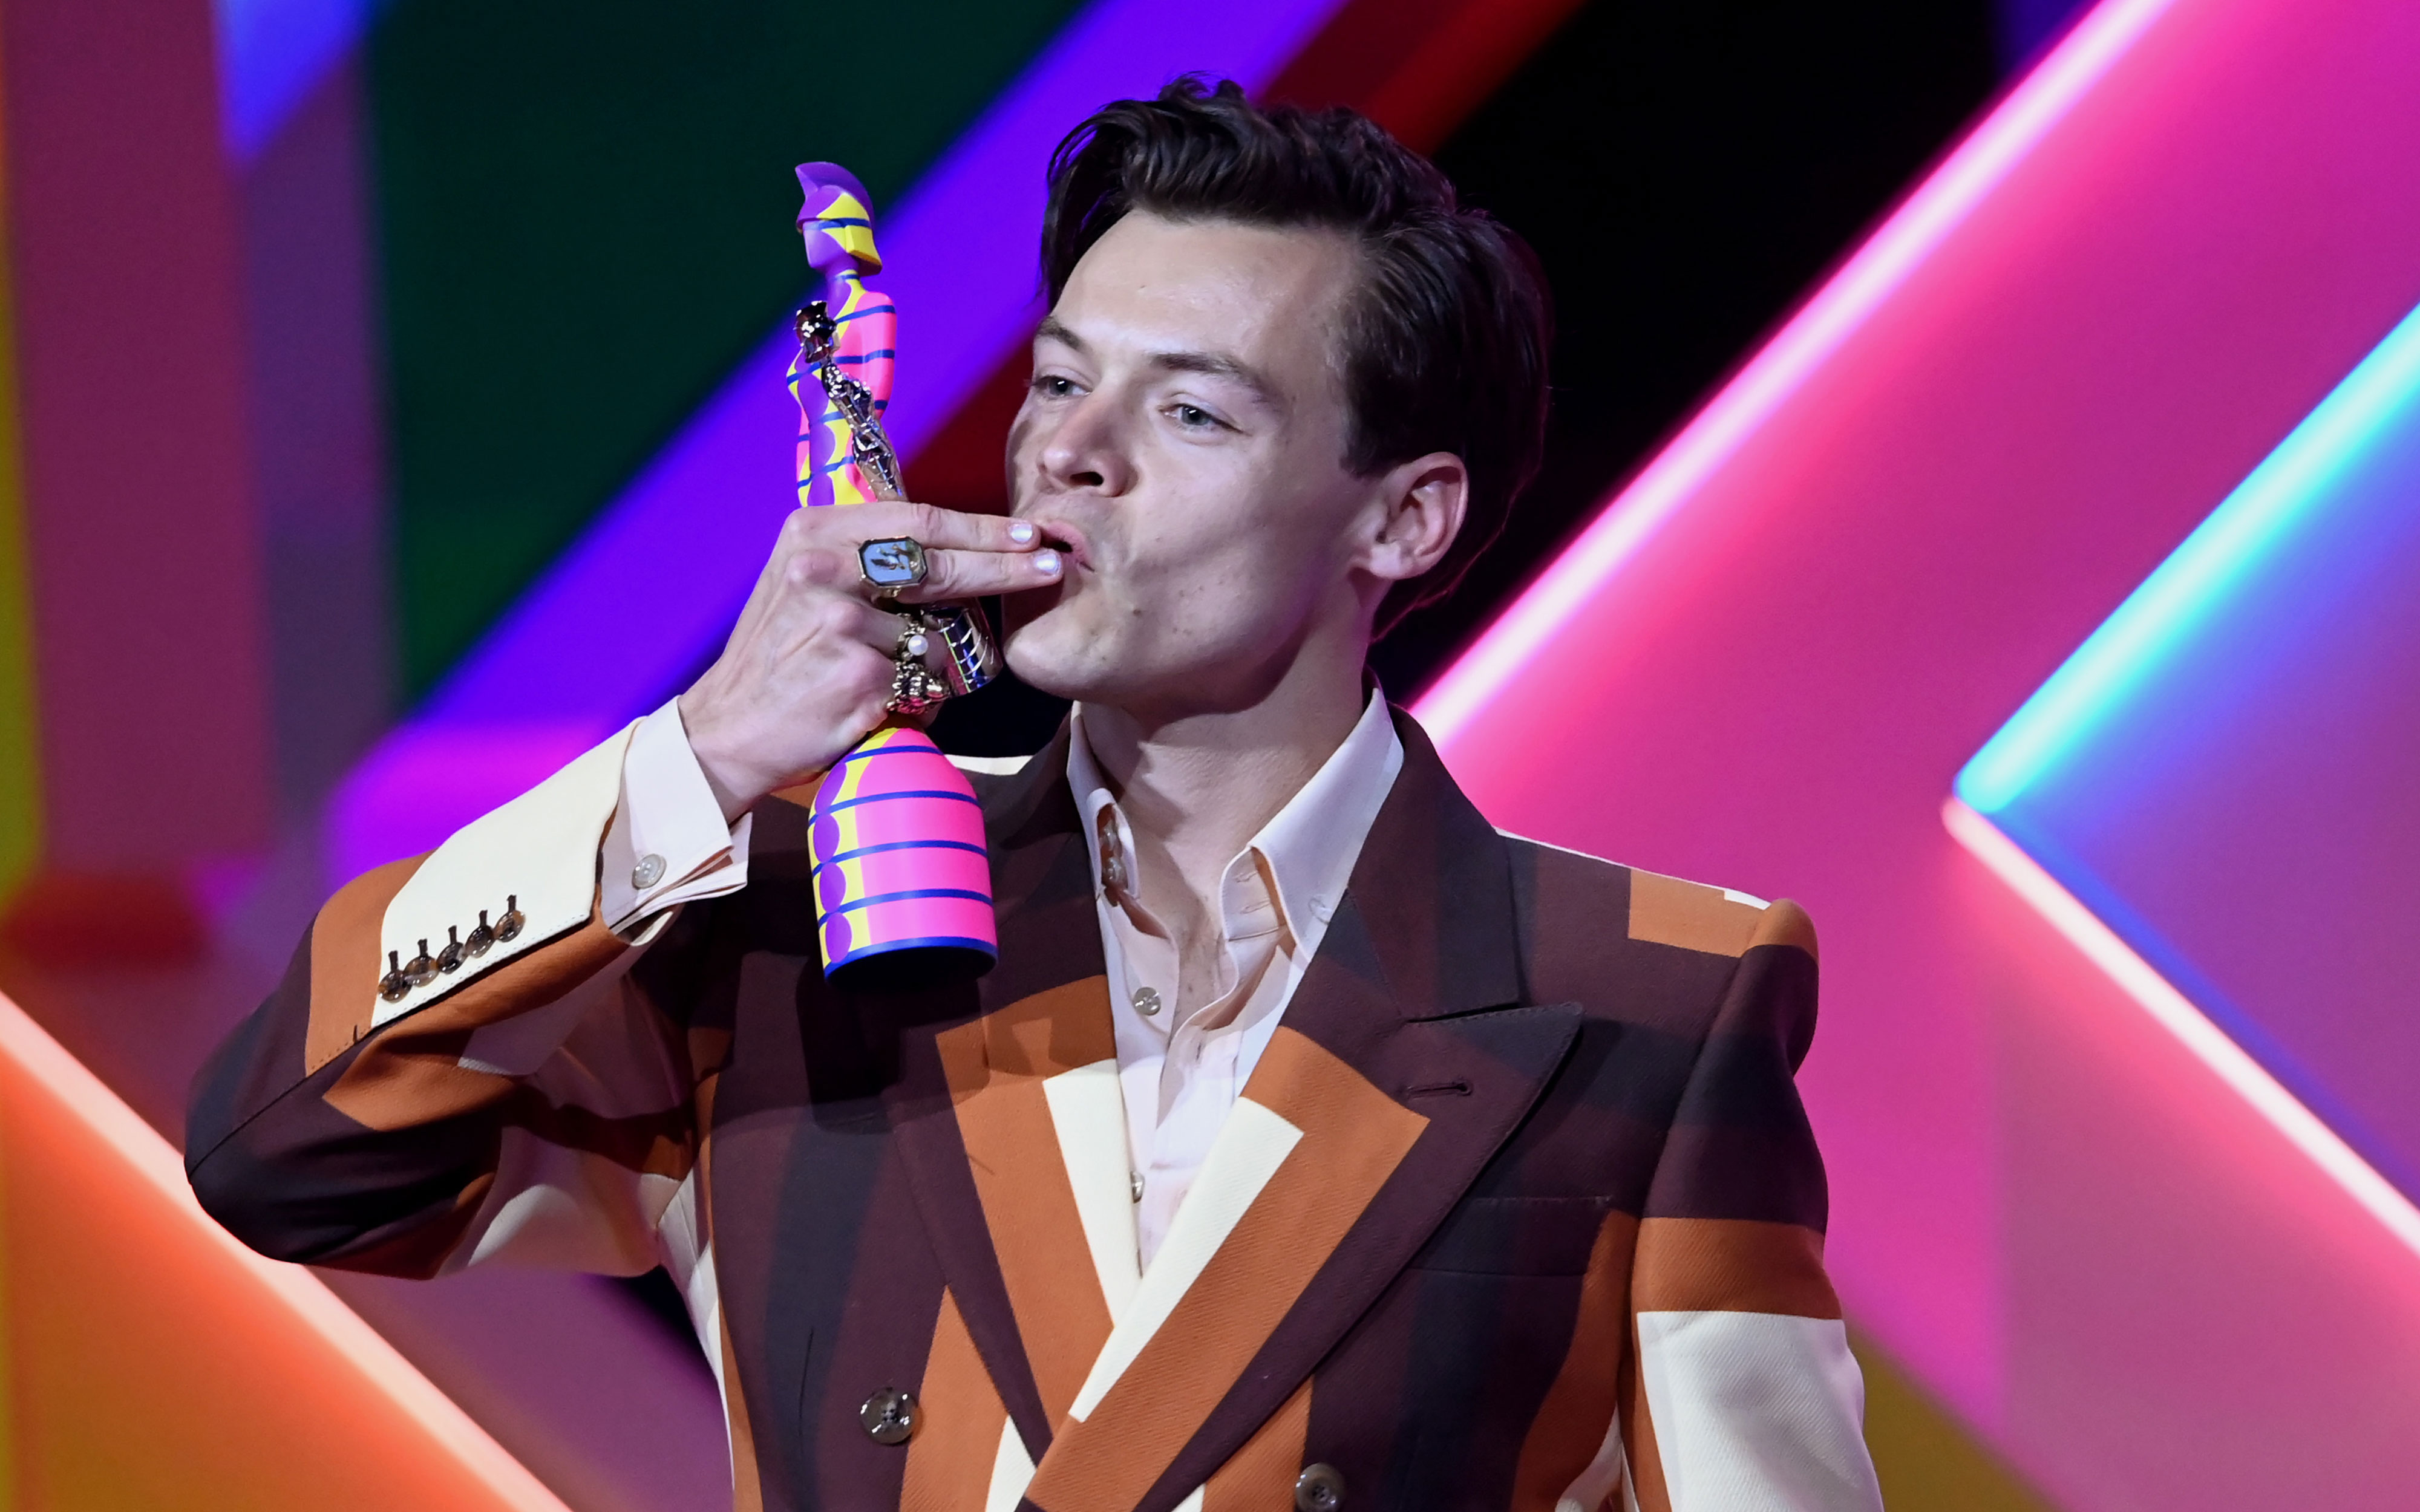 Harry Styles’ Gucci Suit and Purse + More Memorable Looks From the 2021 Brit Awards